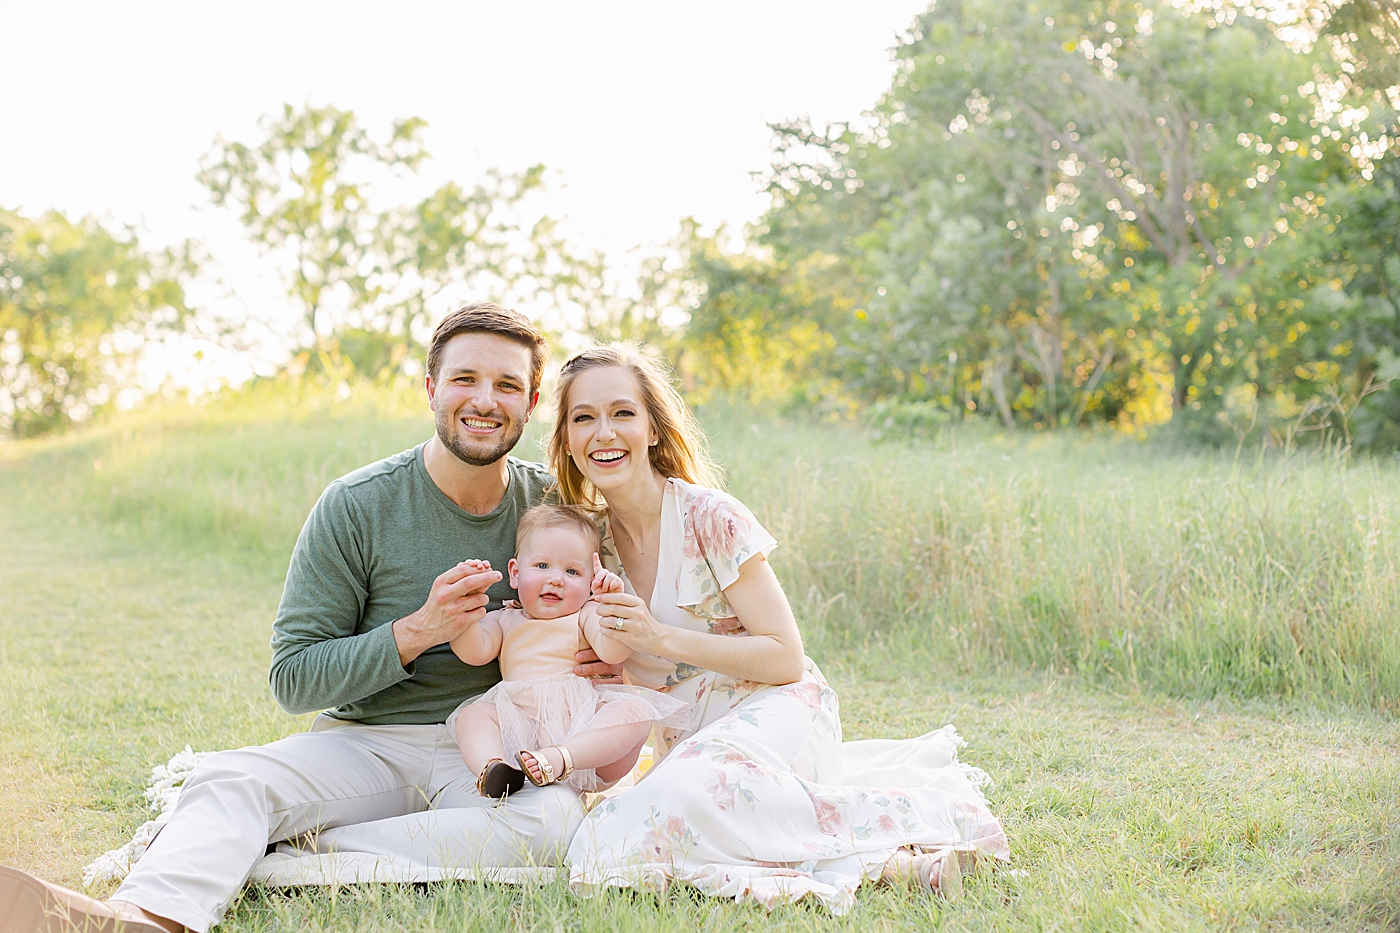 Mom and dad sitting on a blanket with their baby girl in a field | Sana Ahmed Photography